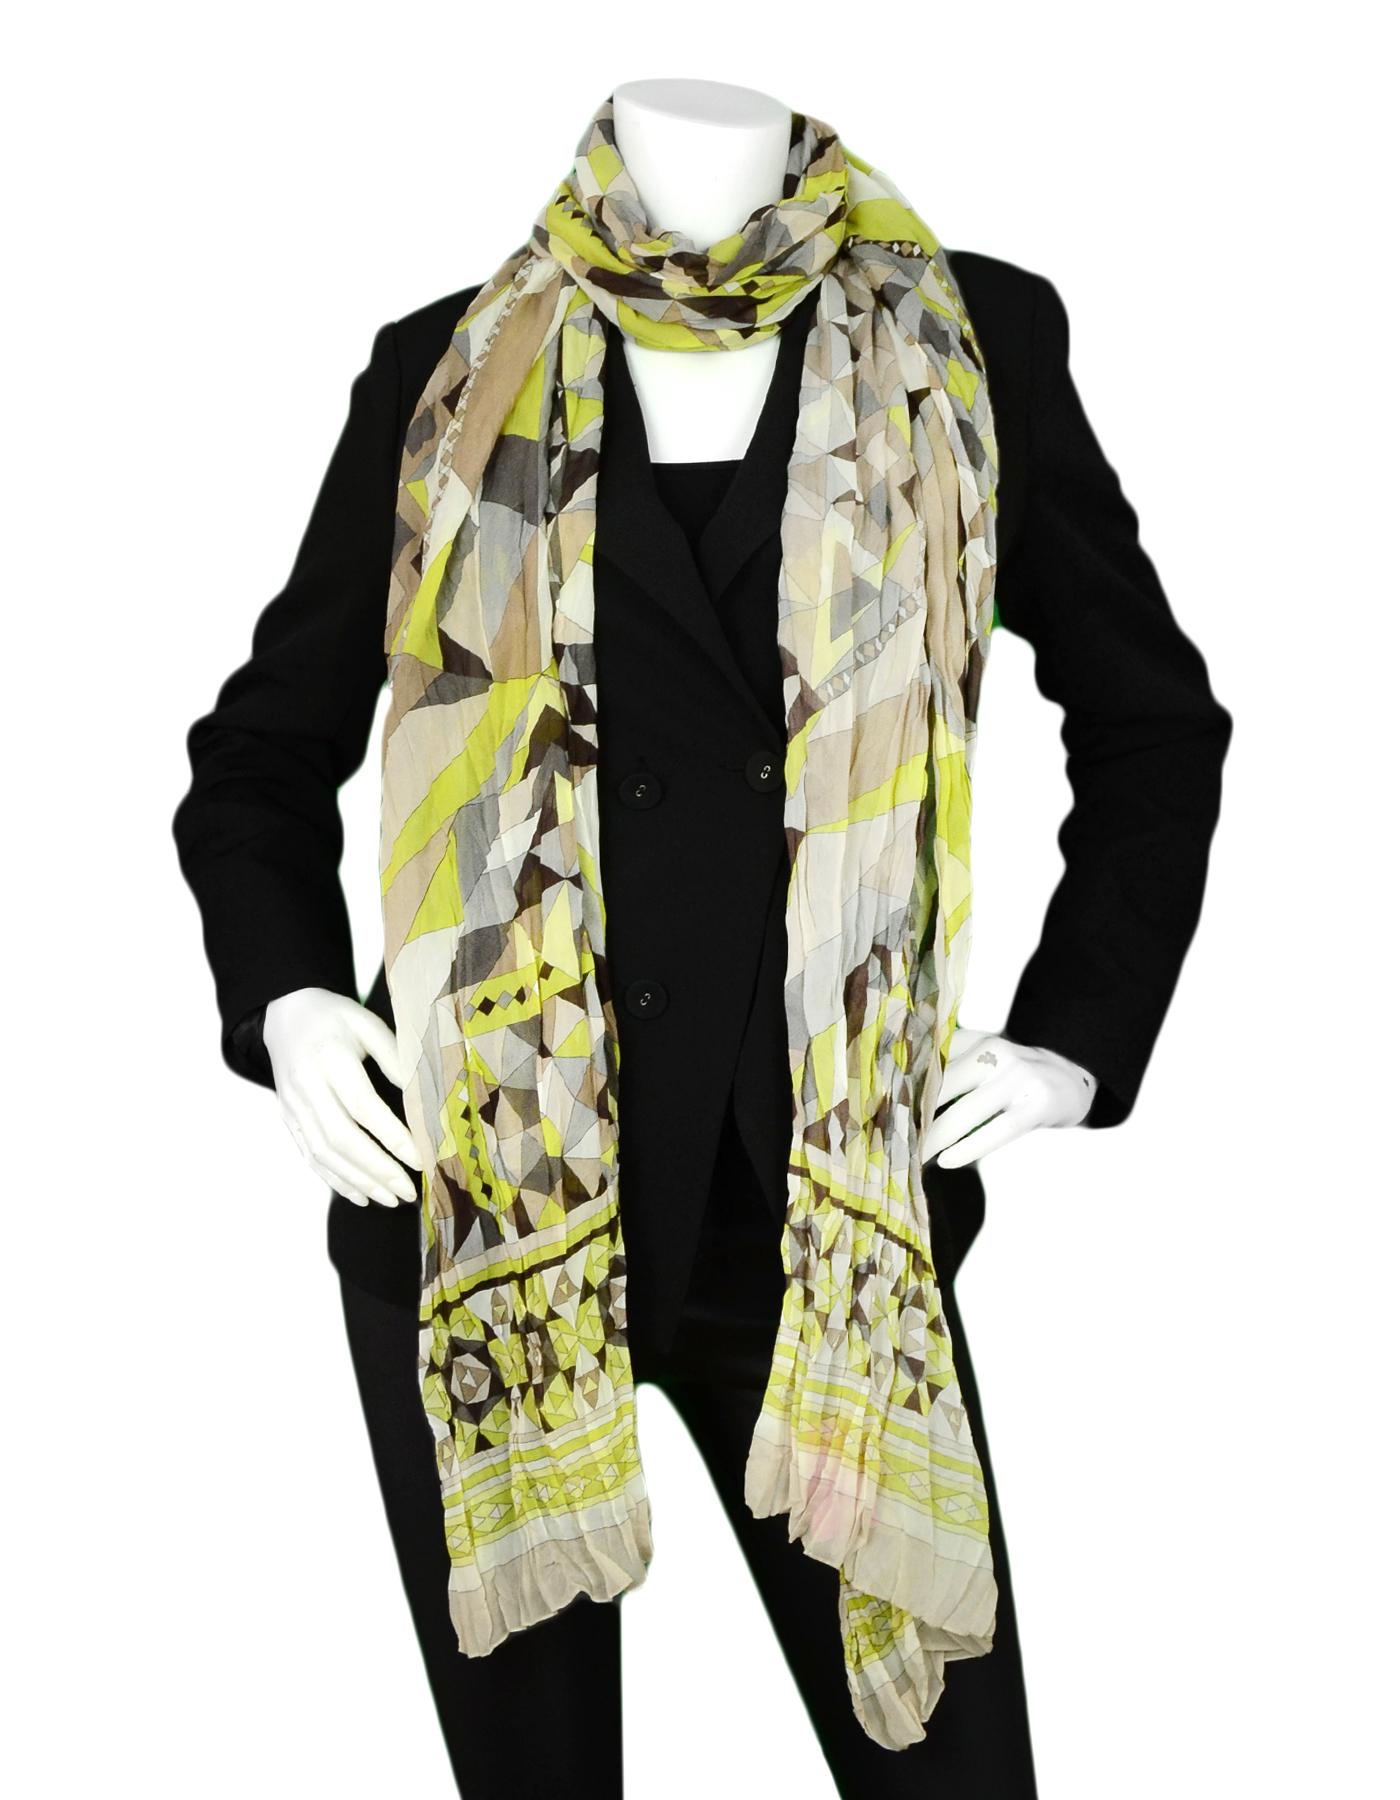 Emilio Pucci Yellow & Grey Silk Crinkled Scarf

Color: Yellow, grey 
Materials: Silk (missing composition tag)
Overall Condition: Excellent pre-owned condition, with the exception of missing composition tag
Measurements: 
93